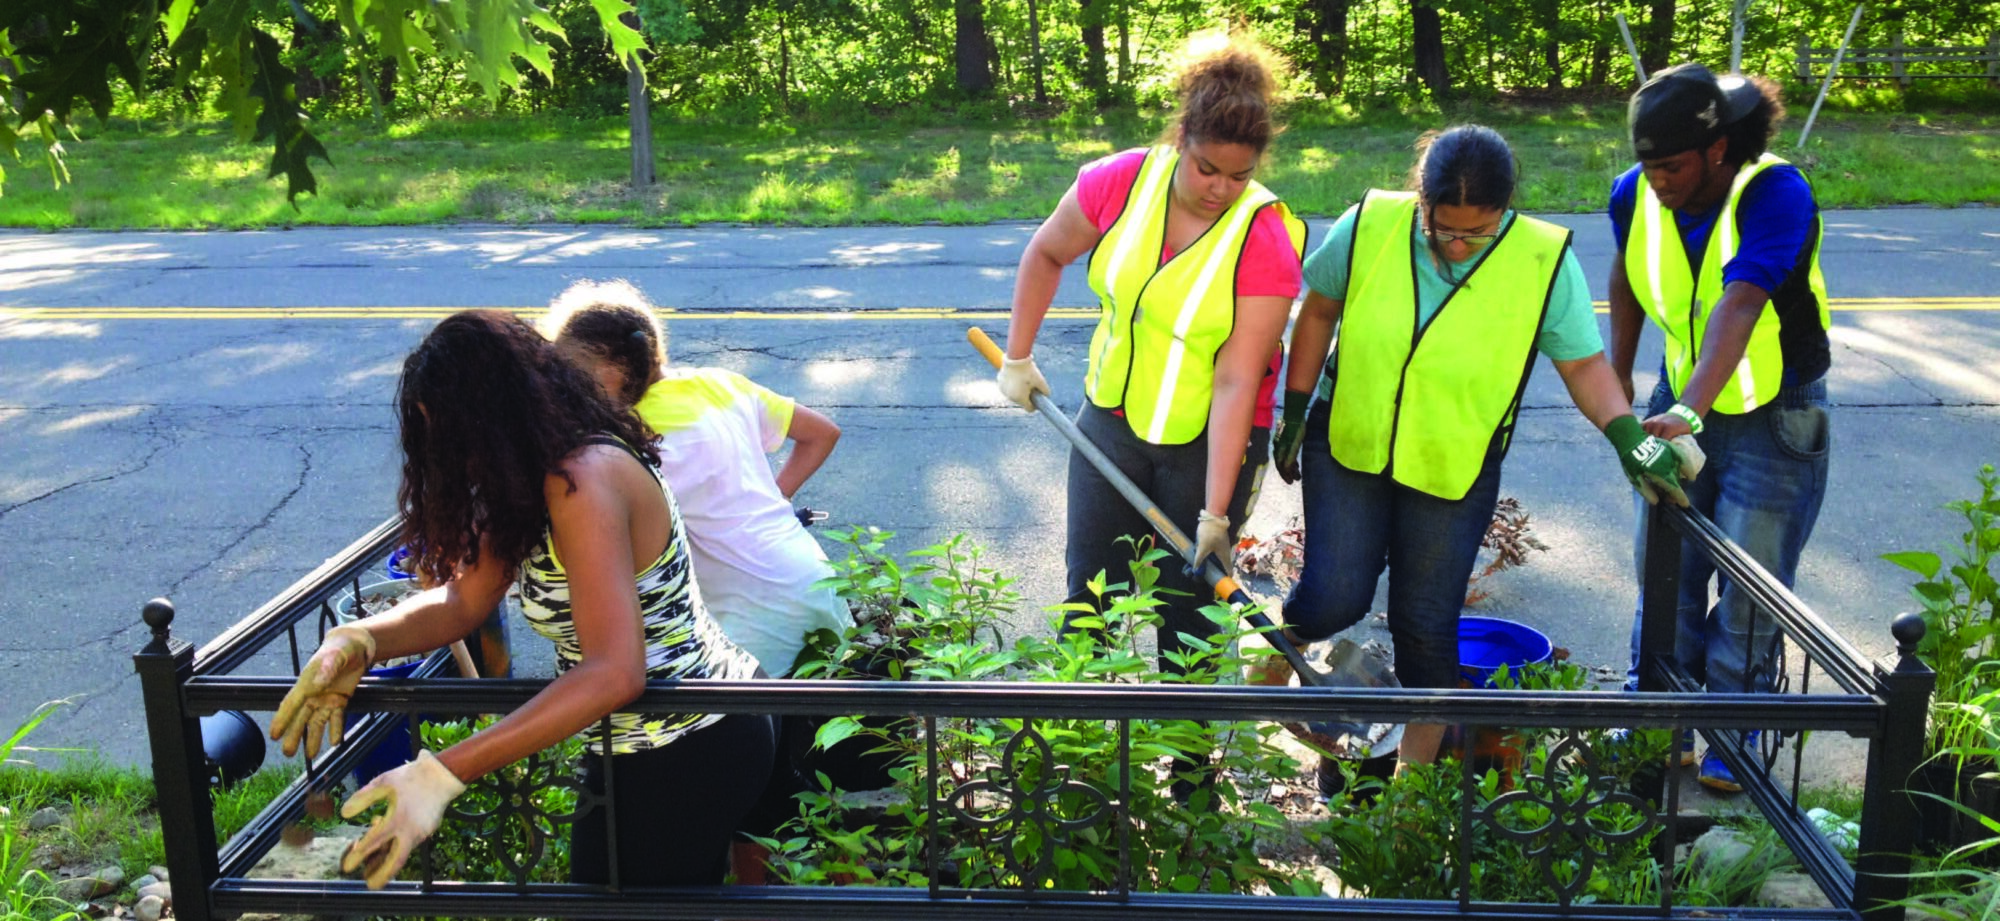 In 2014 and 2015, LIS Futures Fund grants supported a project to install bioswales to reduce stormwater pollution in New Haven, including in underserved communities. Turn to page 2 to learn how BIL funds are establishing a new LISS grant program dedicated to underserved and overburdened communities.